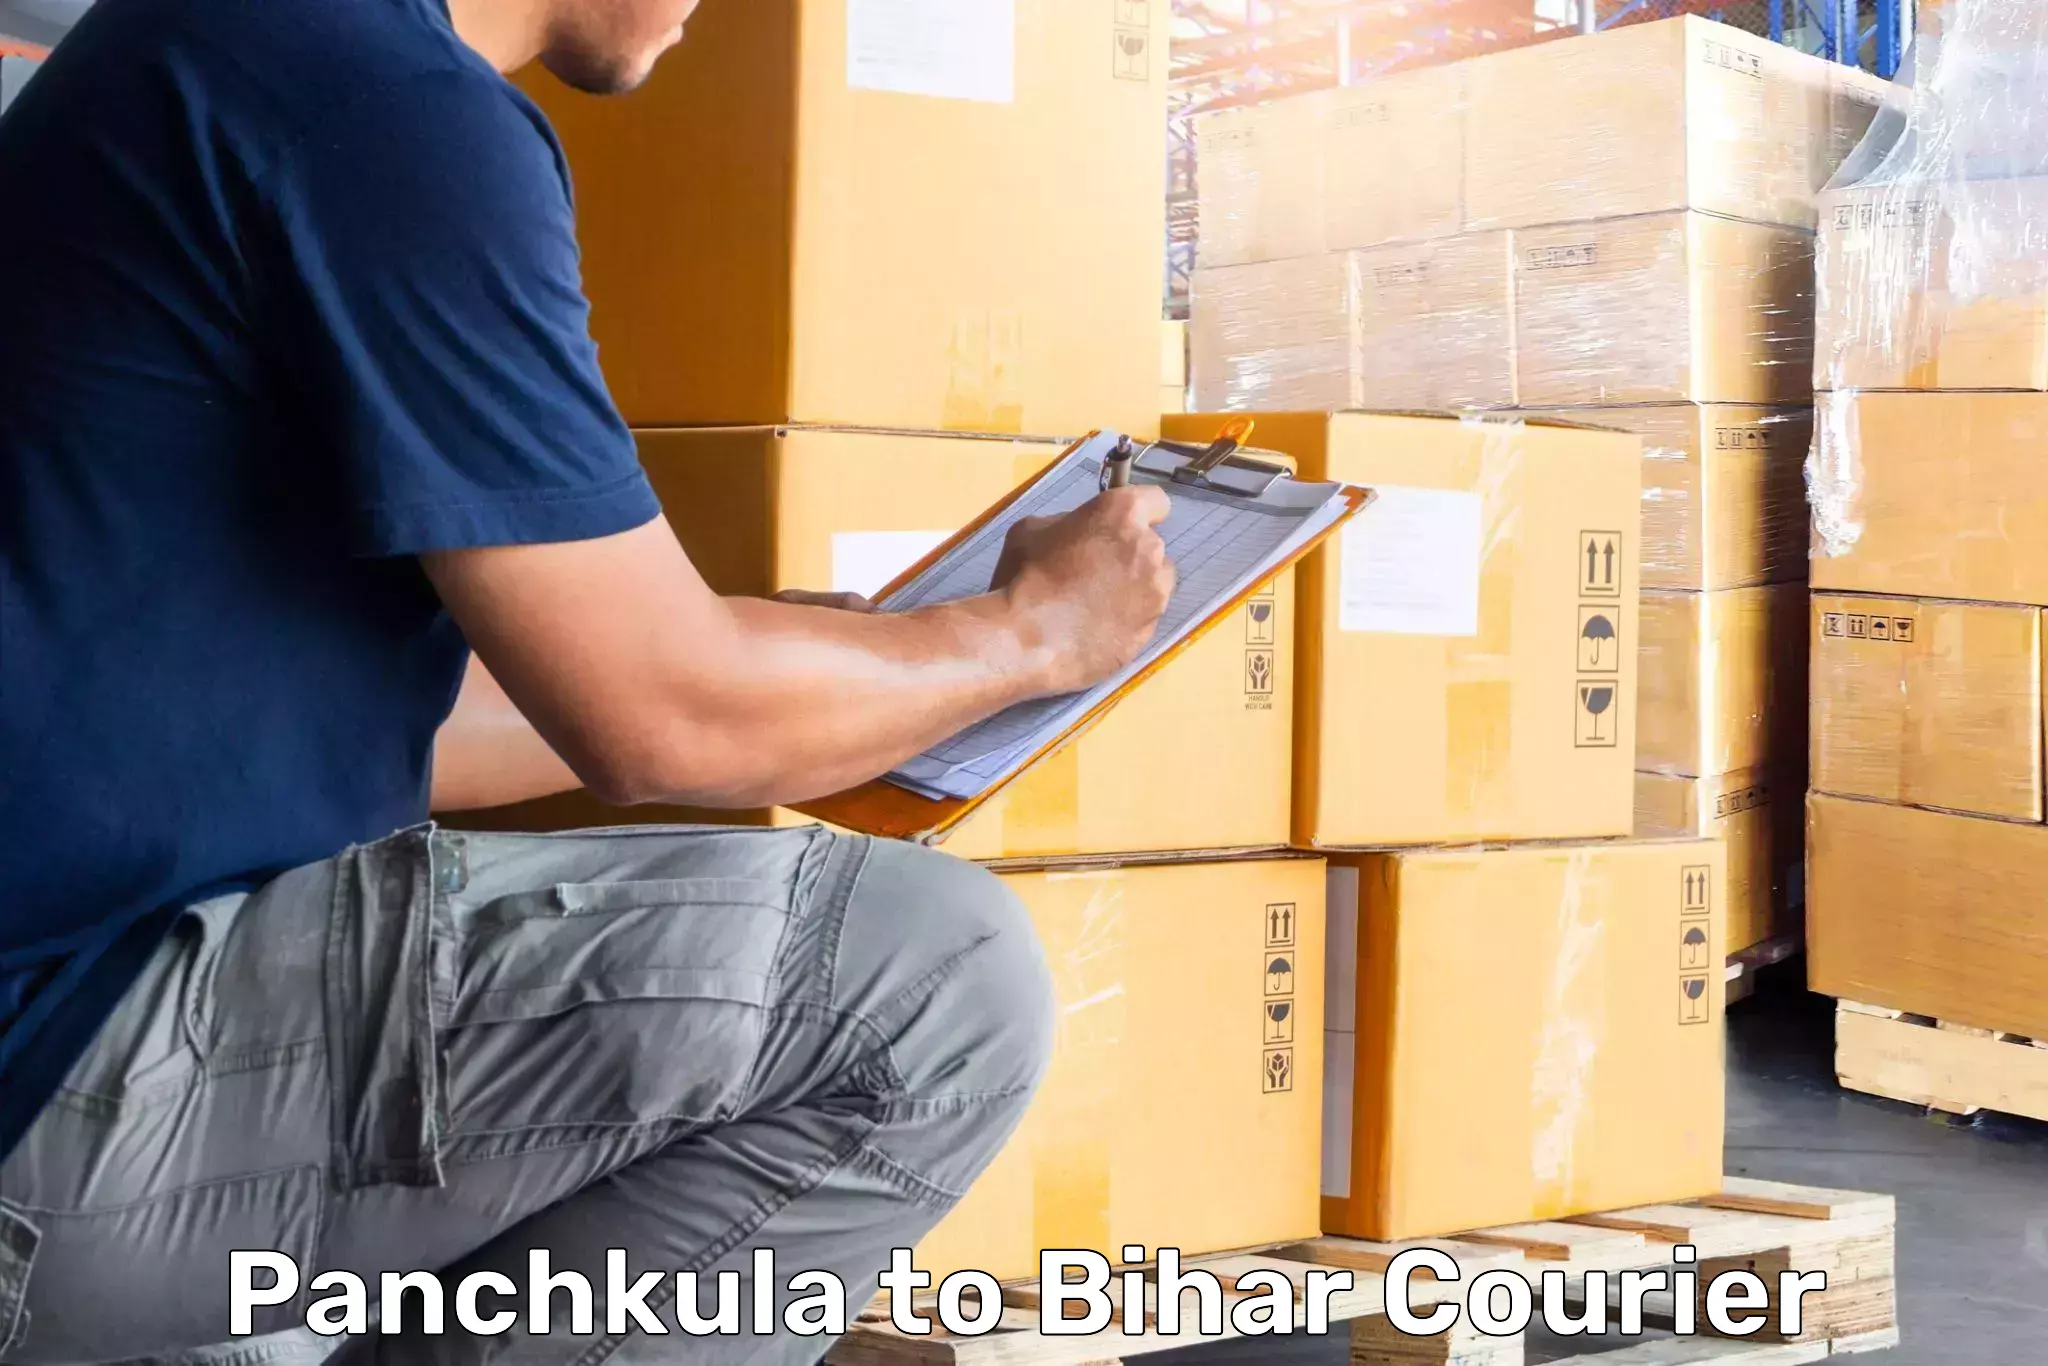 Baggage delivery technology Panchkula to Dehri